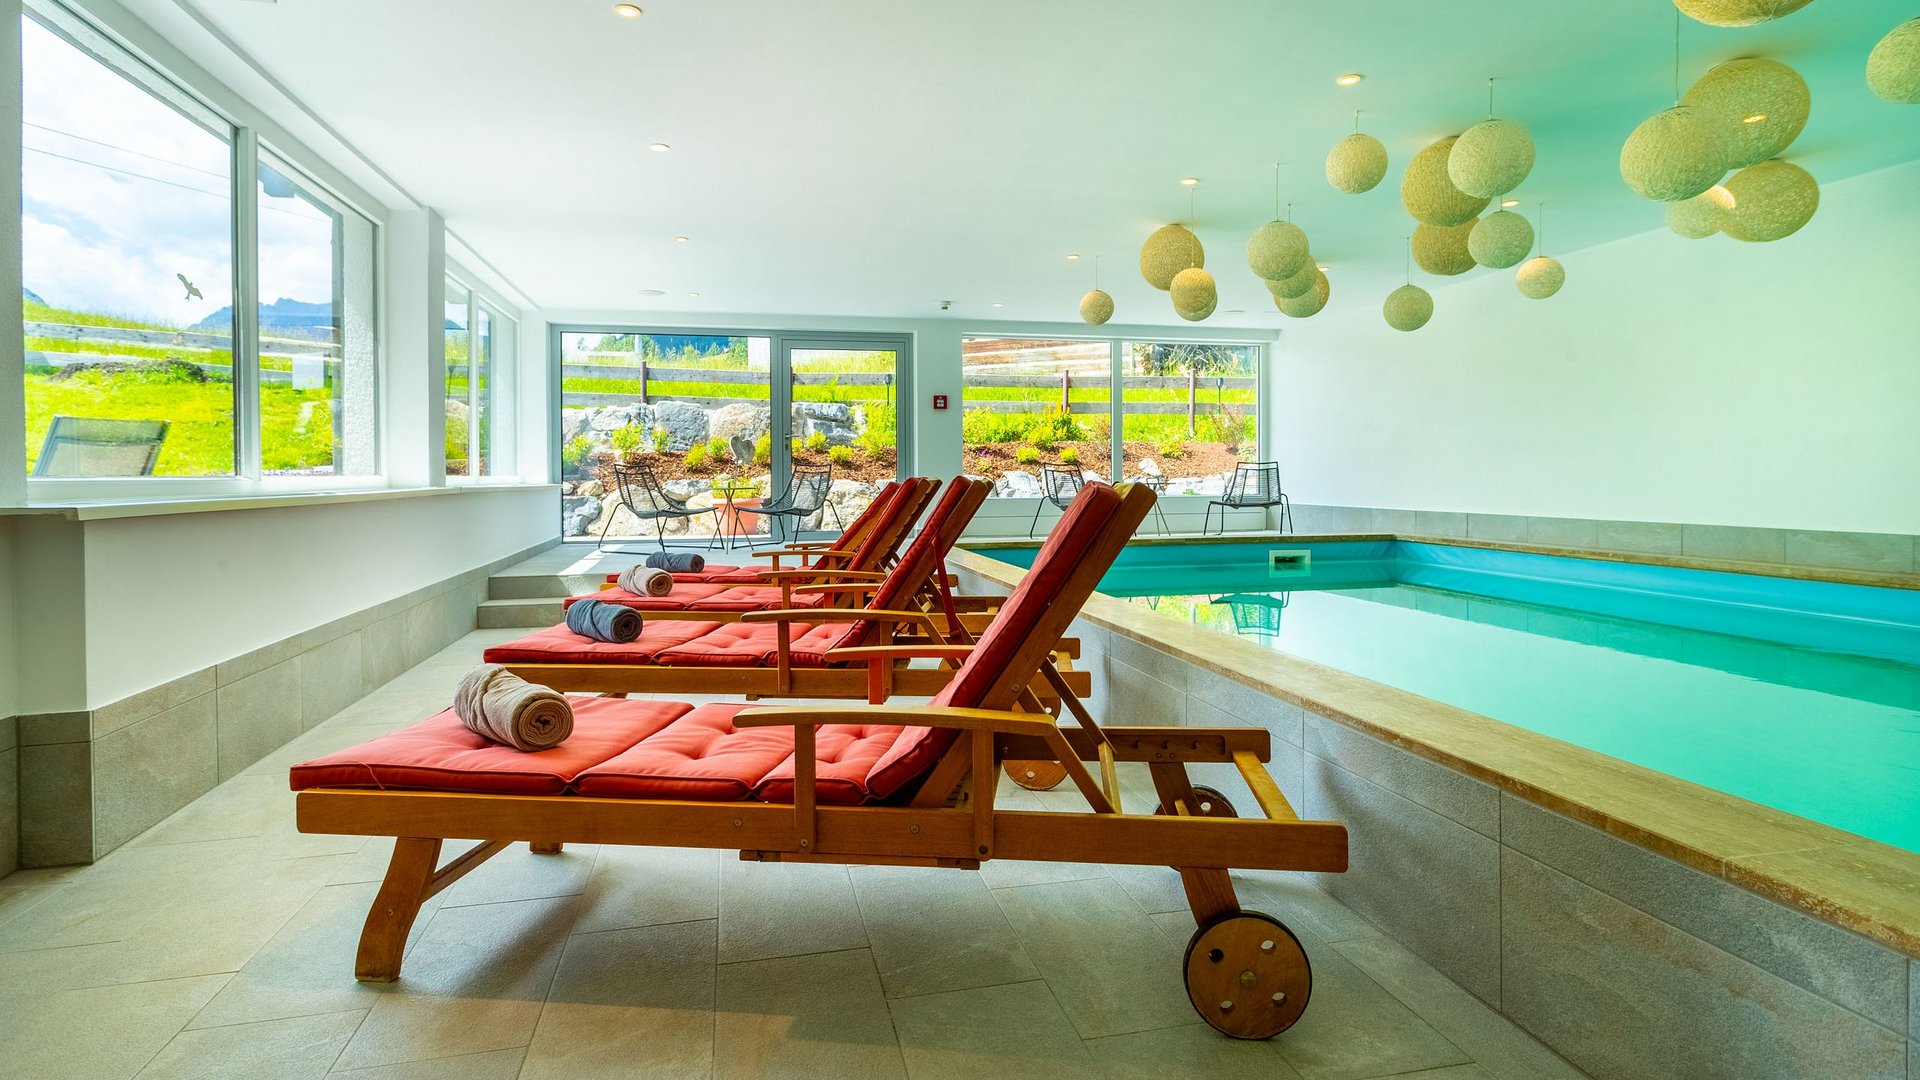 Wellness hotel in Kleinwalsertal: pool and sauna with a view